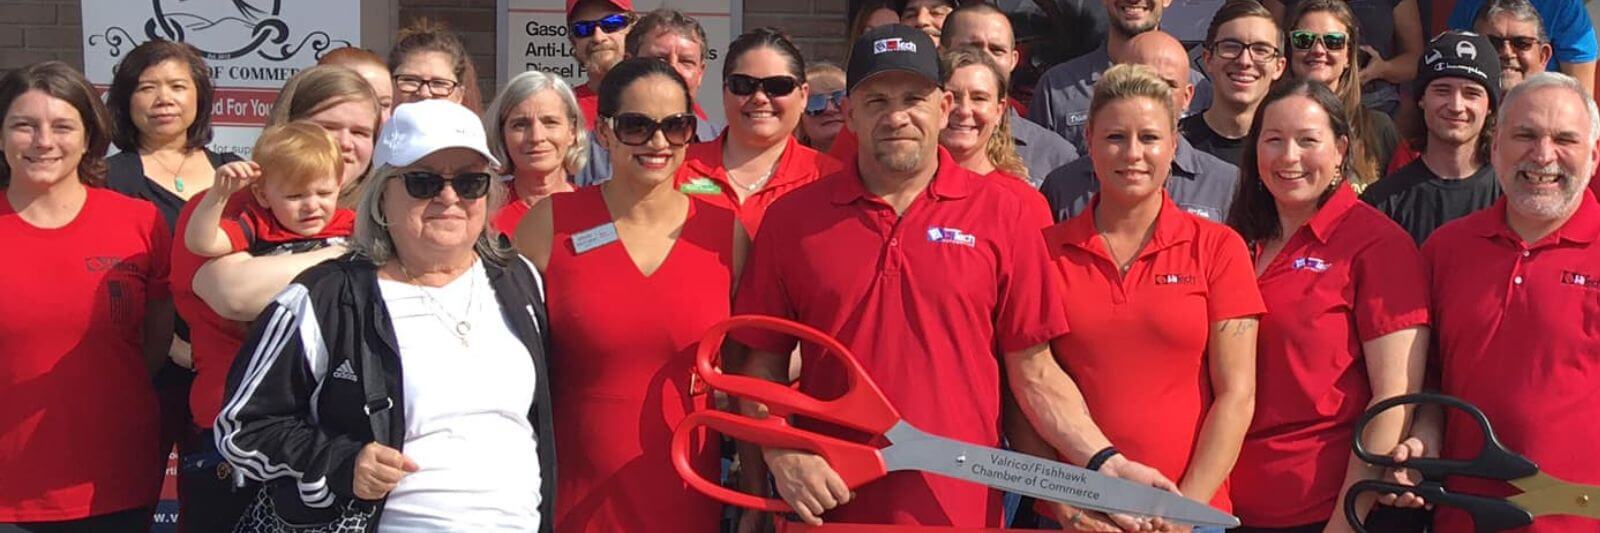 People in red shirts posing with ribbon cutting scissors